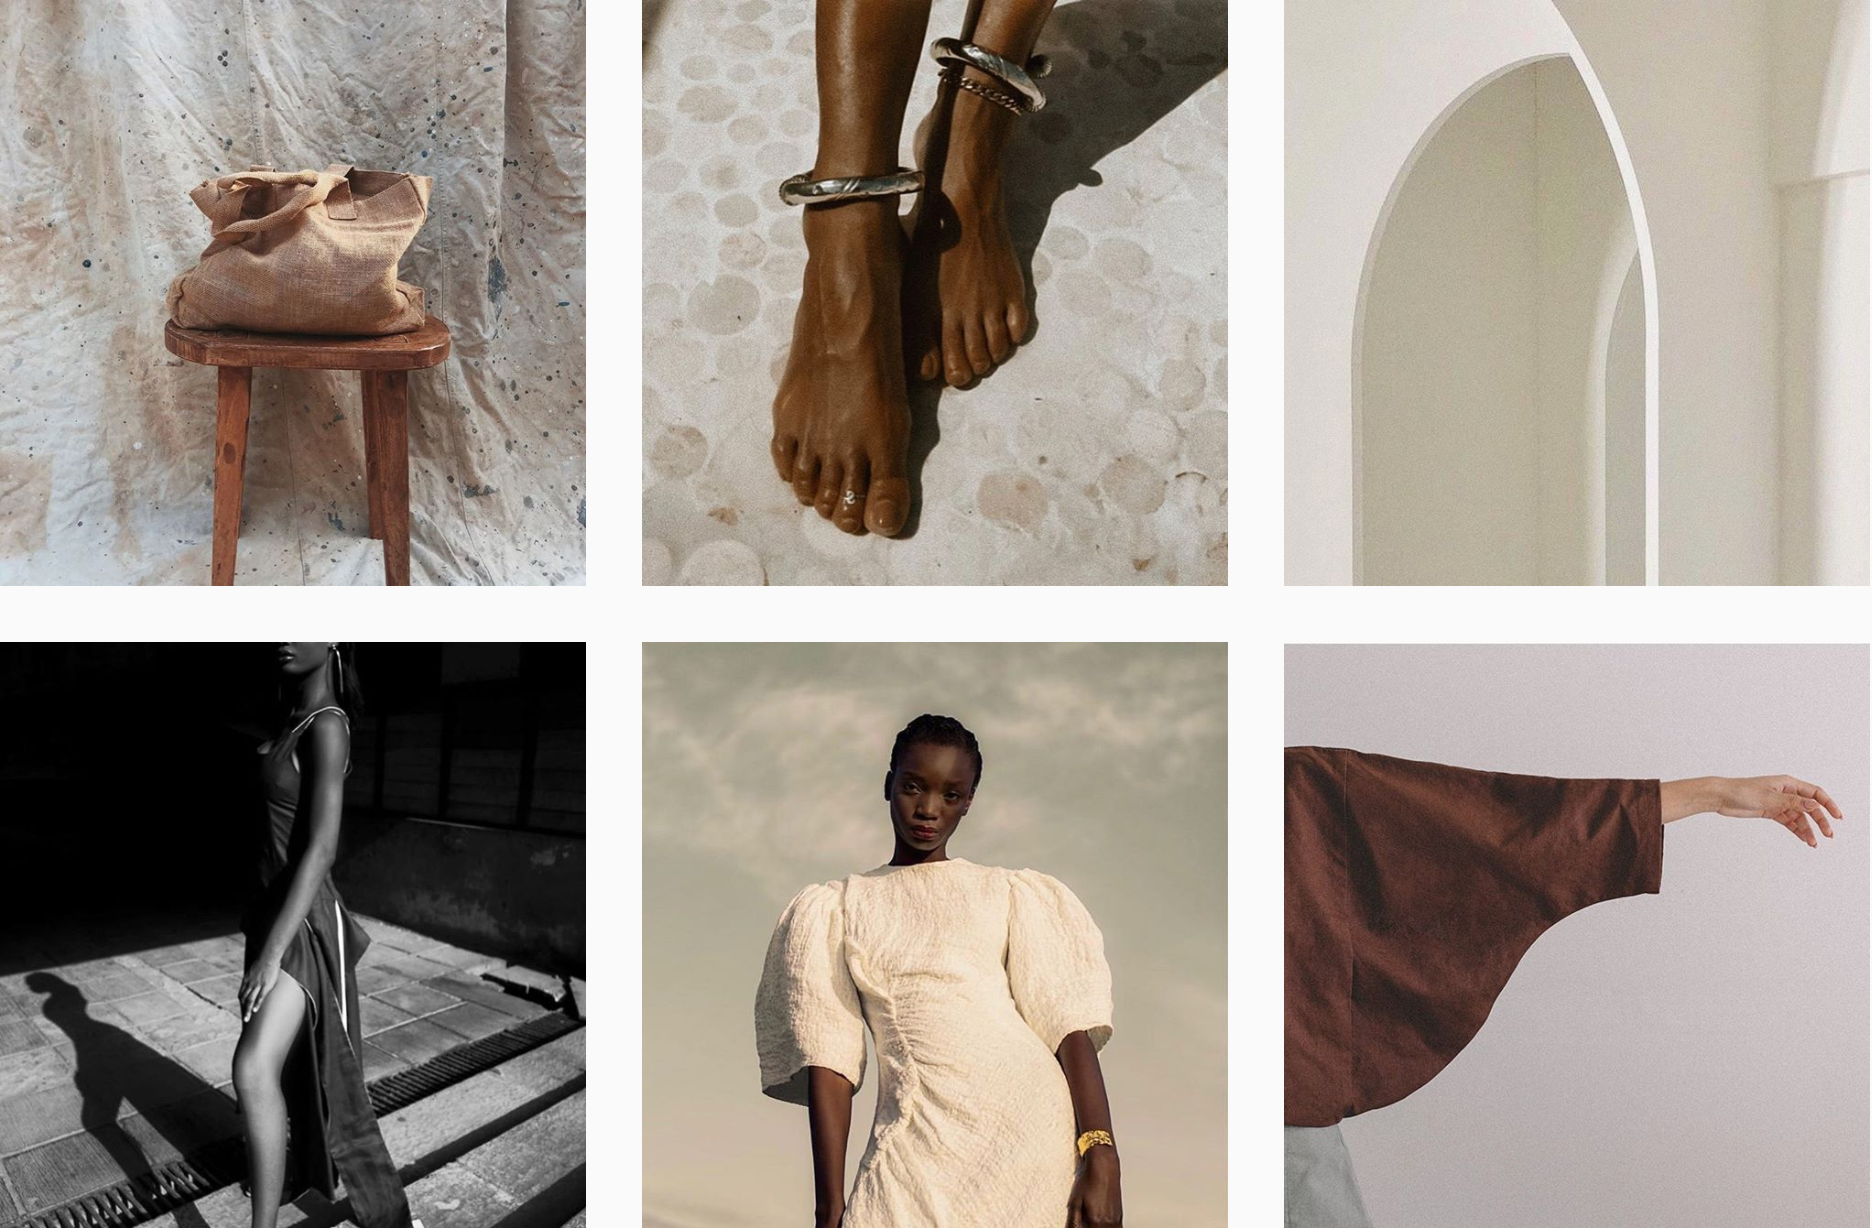 Marisa Martins, fashion stylist and Instagram influencer, in a series of shots showing off her minimalist, tonal aesthetic on Instagram